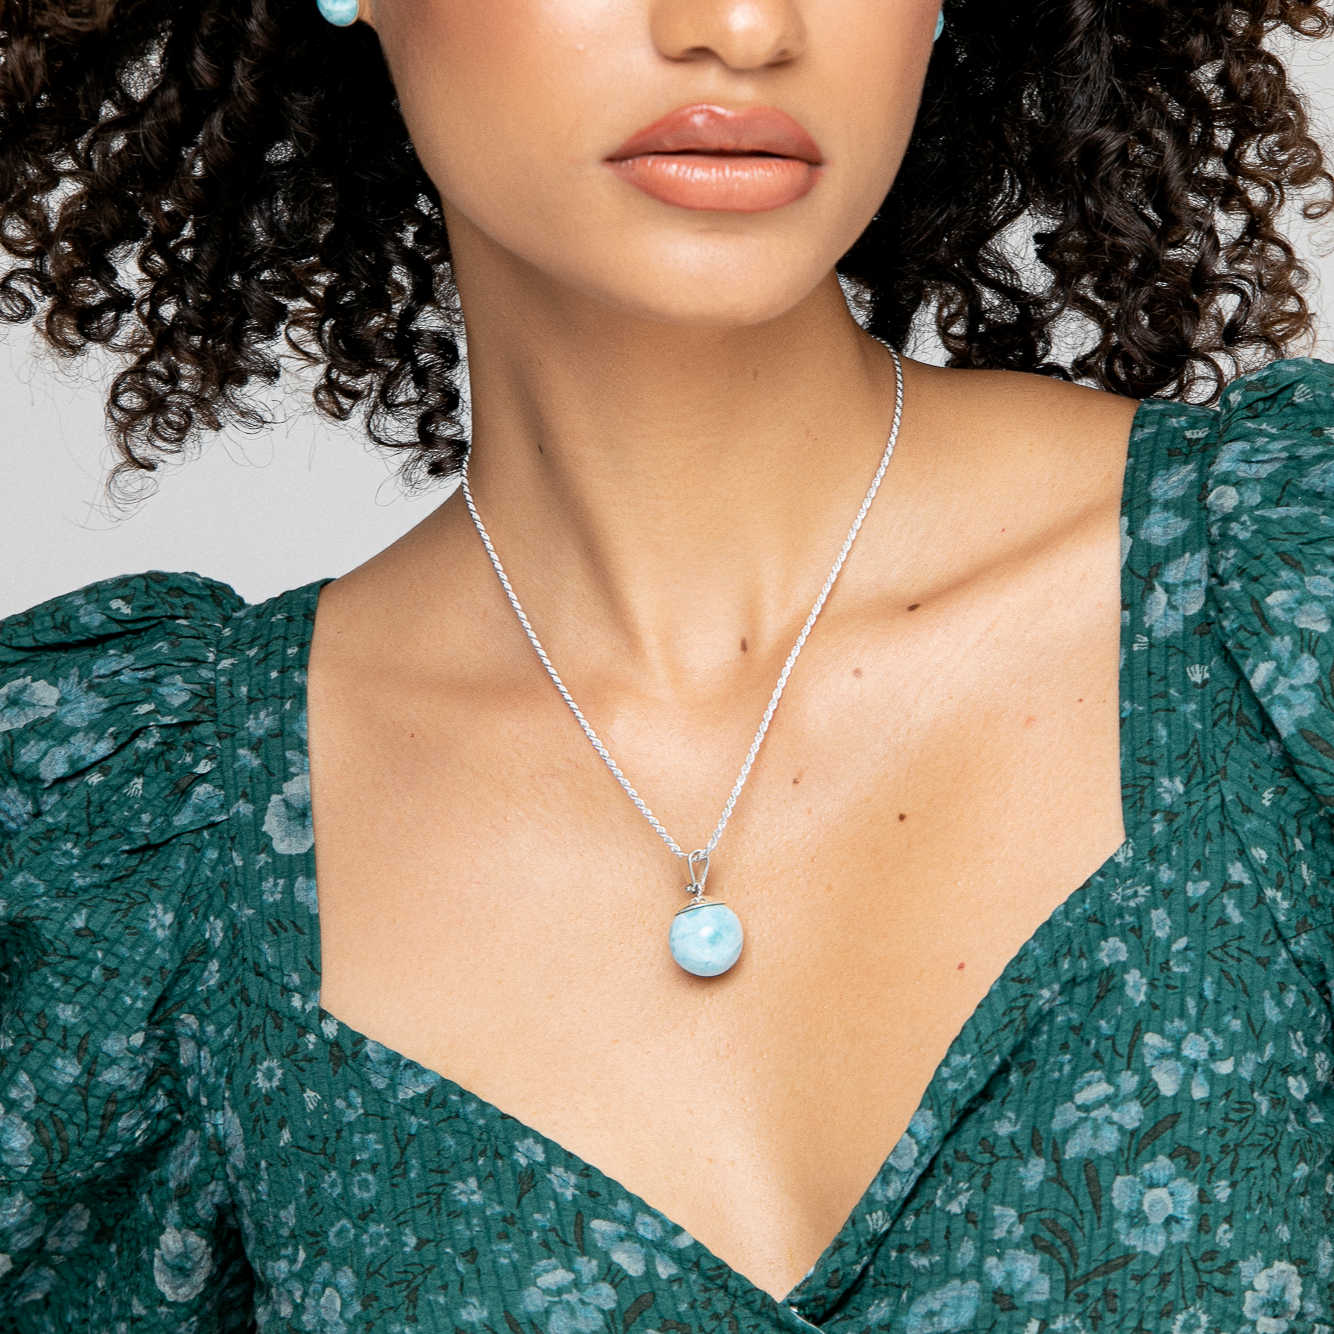 Experience the timeless elegance of the Cecile round Larimar bead pendant. The mesmerizing blue hues of the Larimar stone are showcased by the sleek silver setting, creating a stunning piece that never goes out of style. Handcrafted with care and attention to detail, this pendant is a must-have accessory that's perfect for any occasion. Elevate your look with the understated sophistication of the Cecile pendant, and showcase the natural beauty and timeless charm of the round Larimar bead